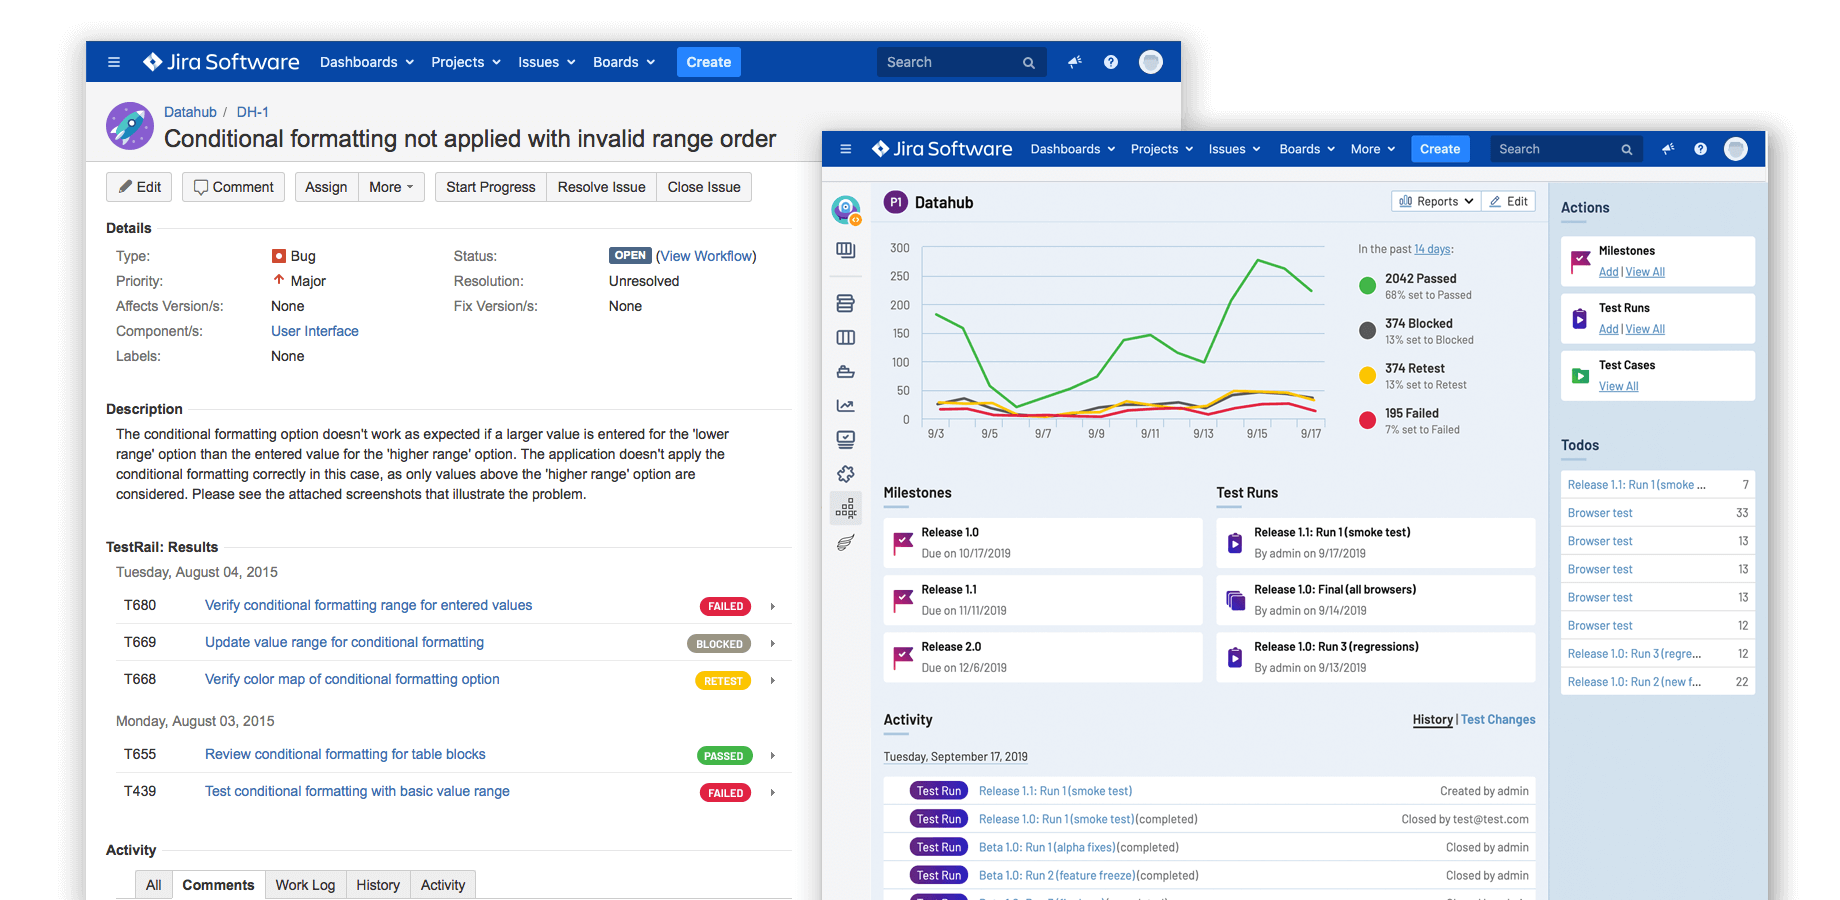 page screen of Jira Software dashboard. Conditional formatting not applied with invalid range order and: details, decription, TestRail: Results, Activity and screen of a chart in Datahub, Milestones, Test Runs and Activiti.